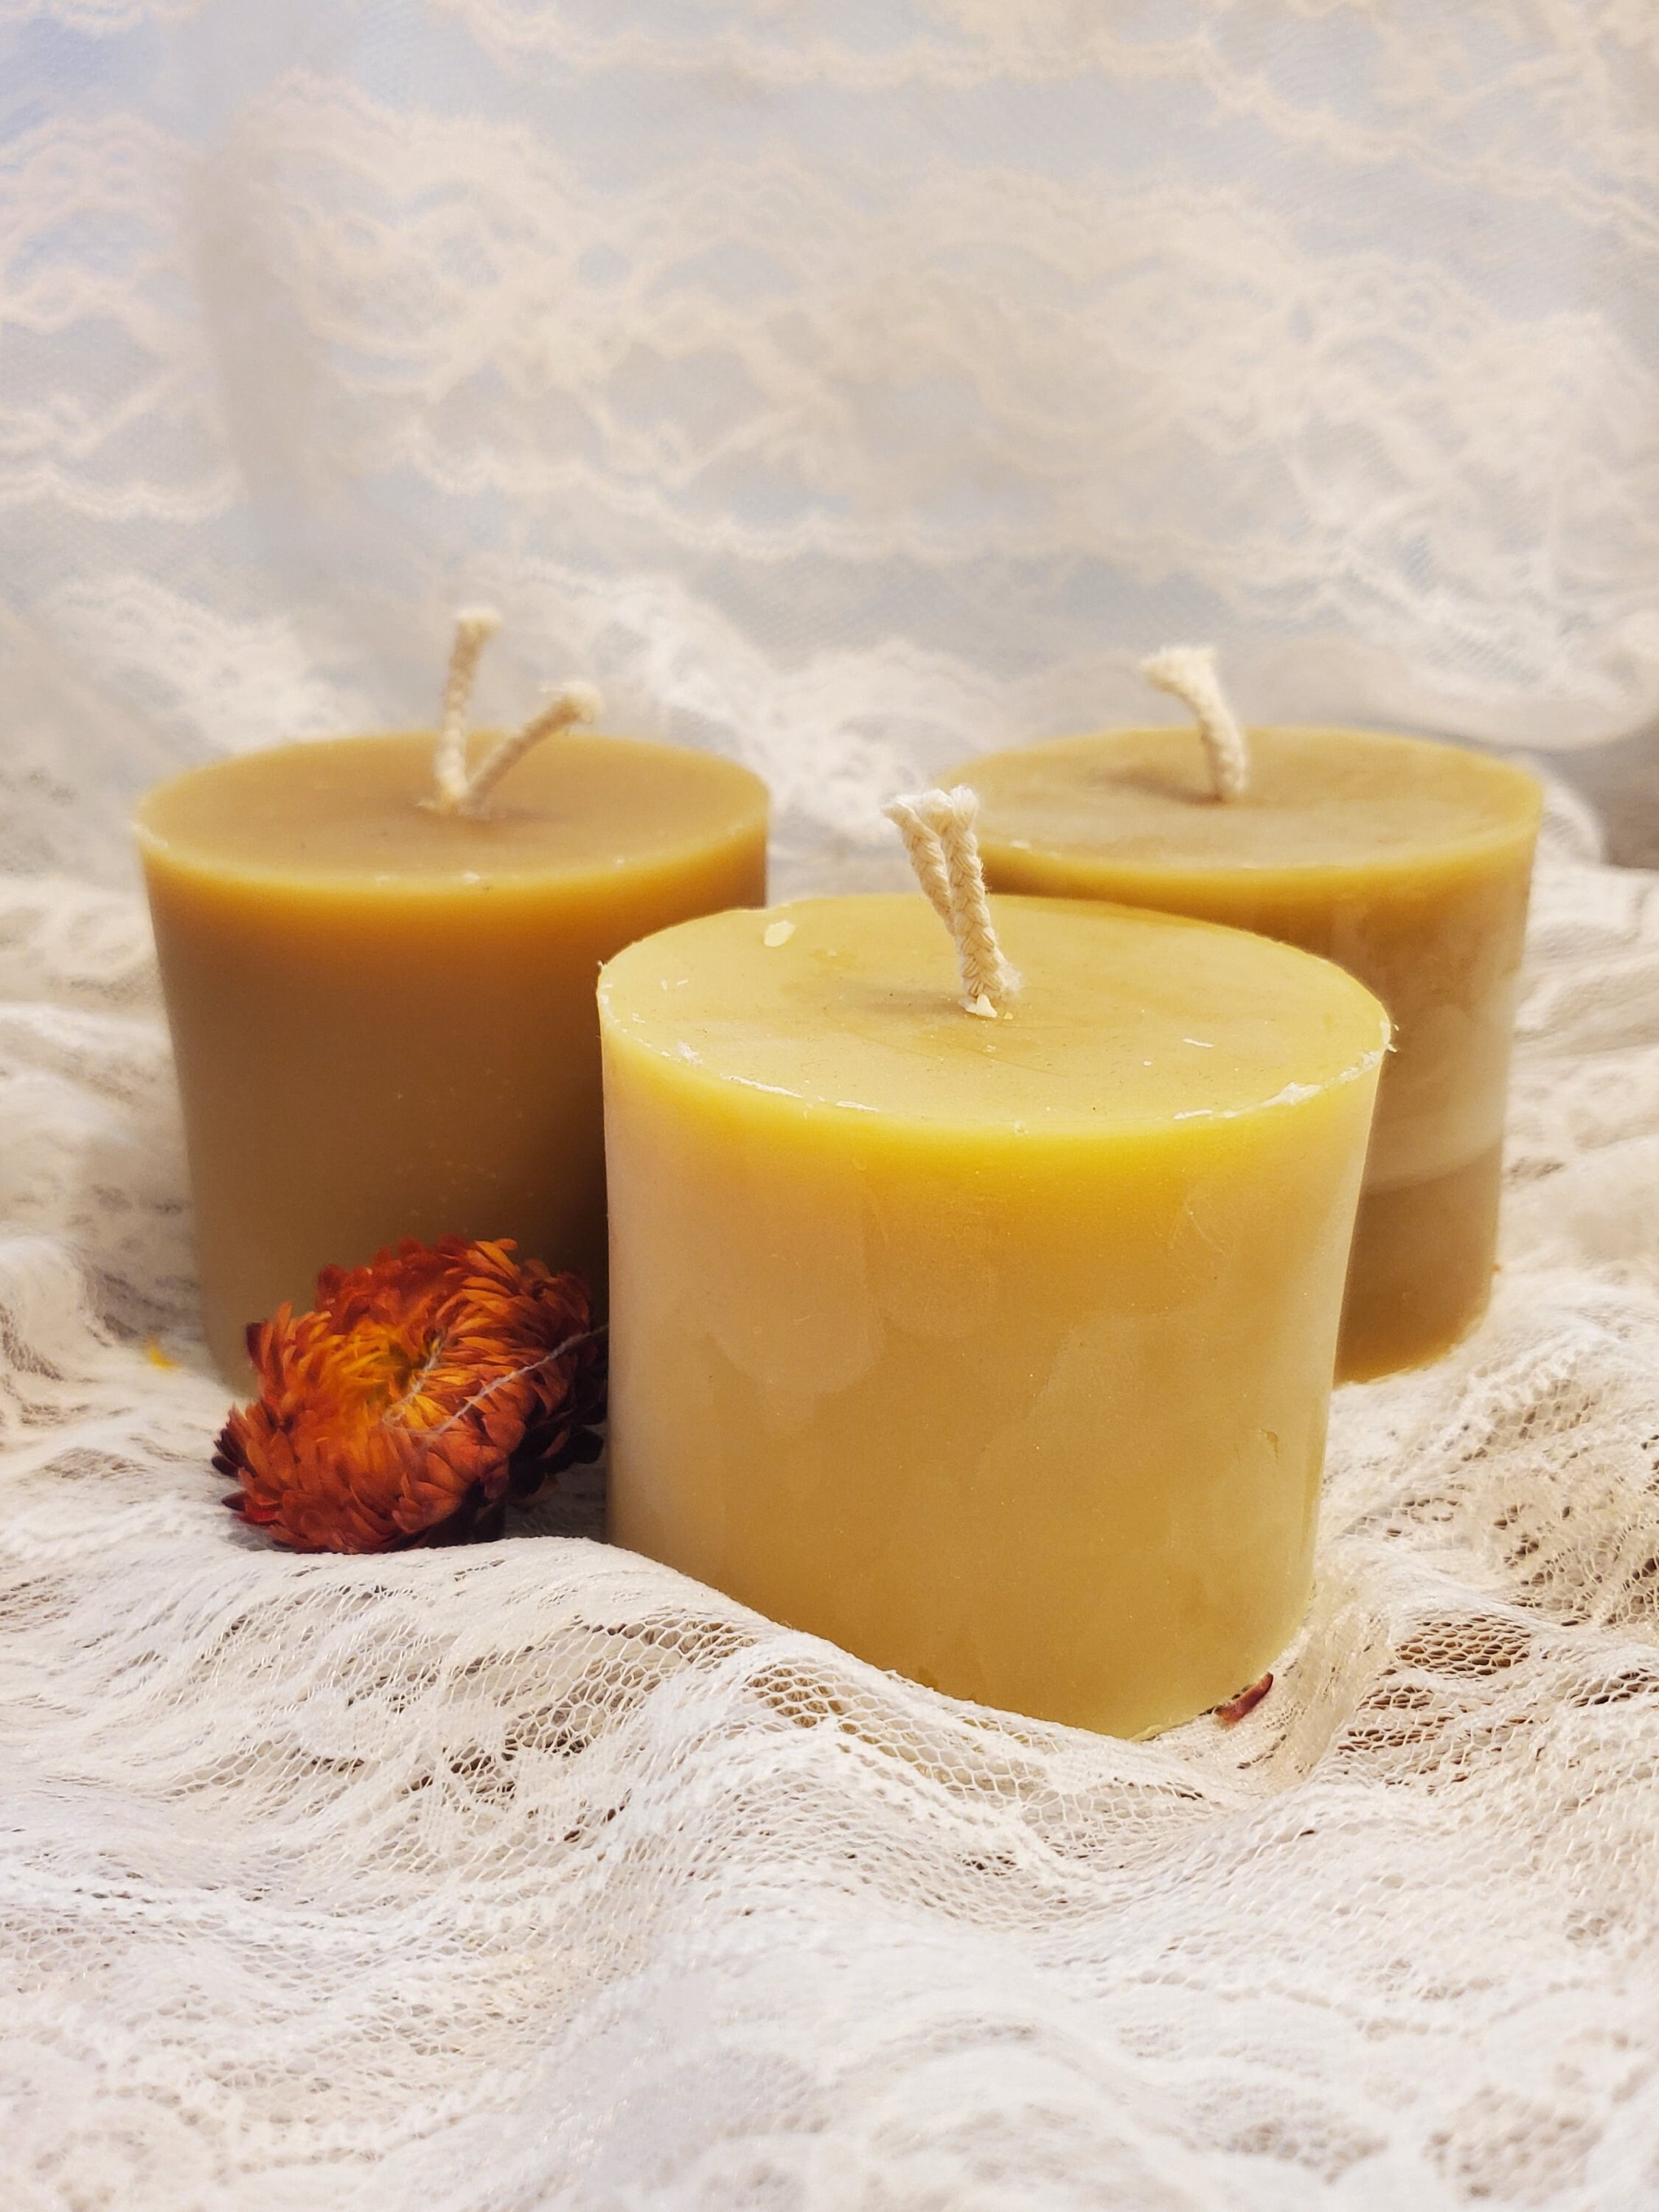 Make Your Own Bees-Wax Havdalah Candle - Available in Bulk Pricing, Arts &  Craft Project Shabbat related